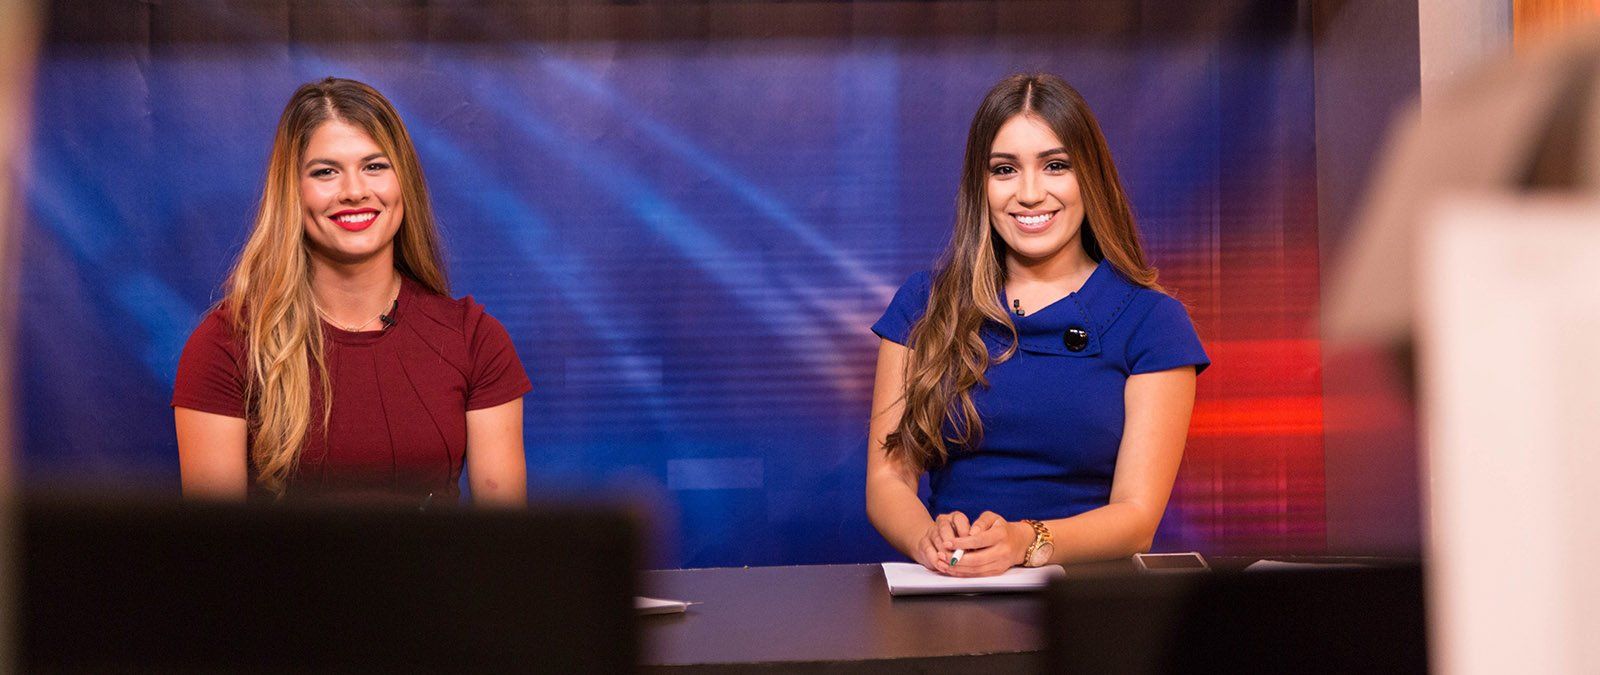 Two female students tv hosts smile as the camera begins recording.